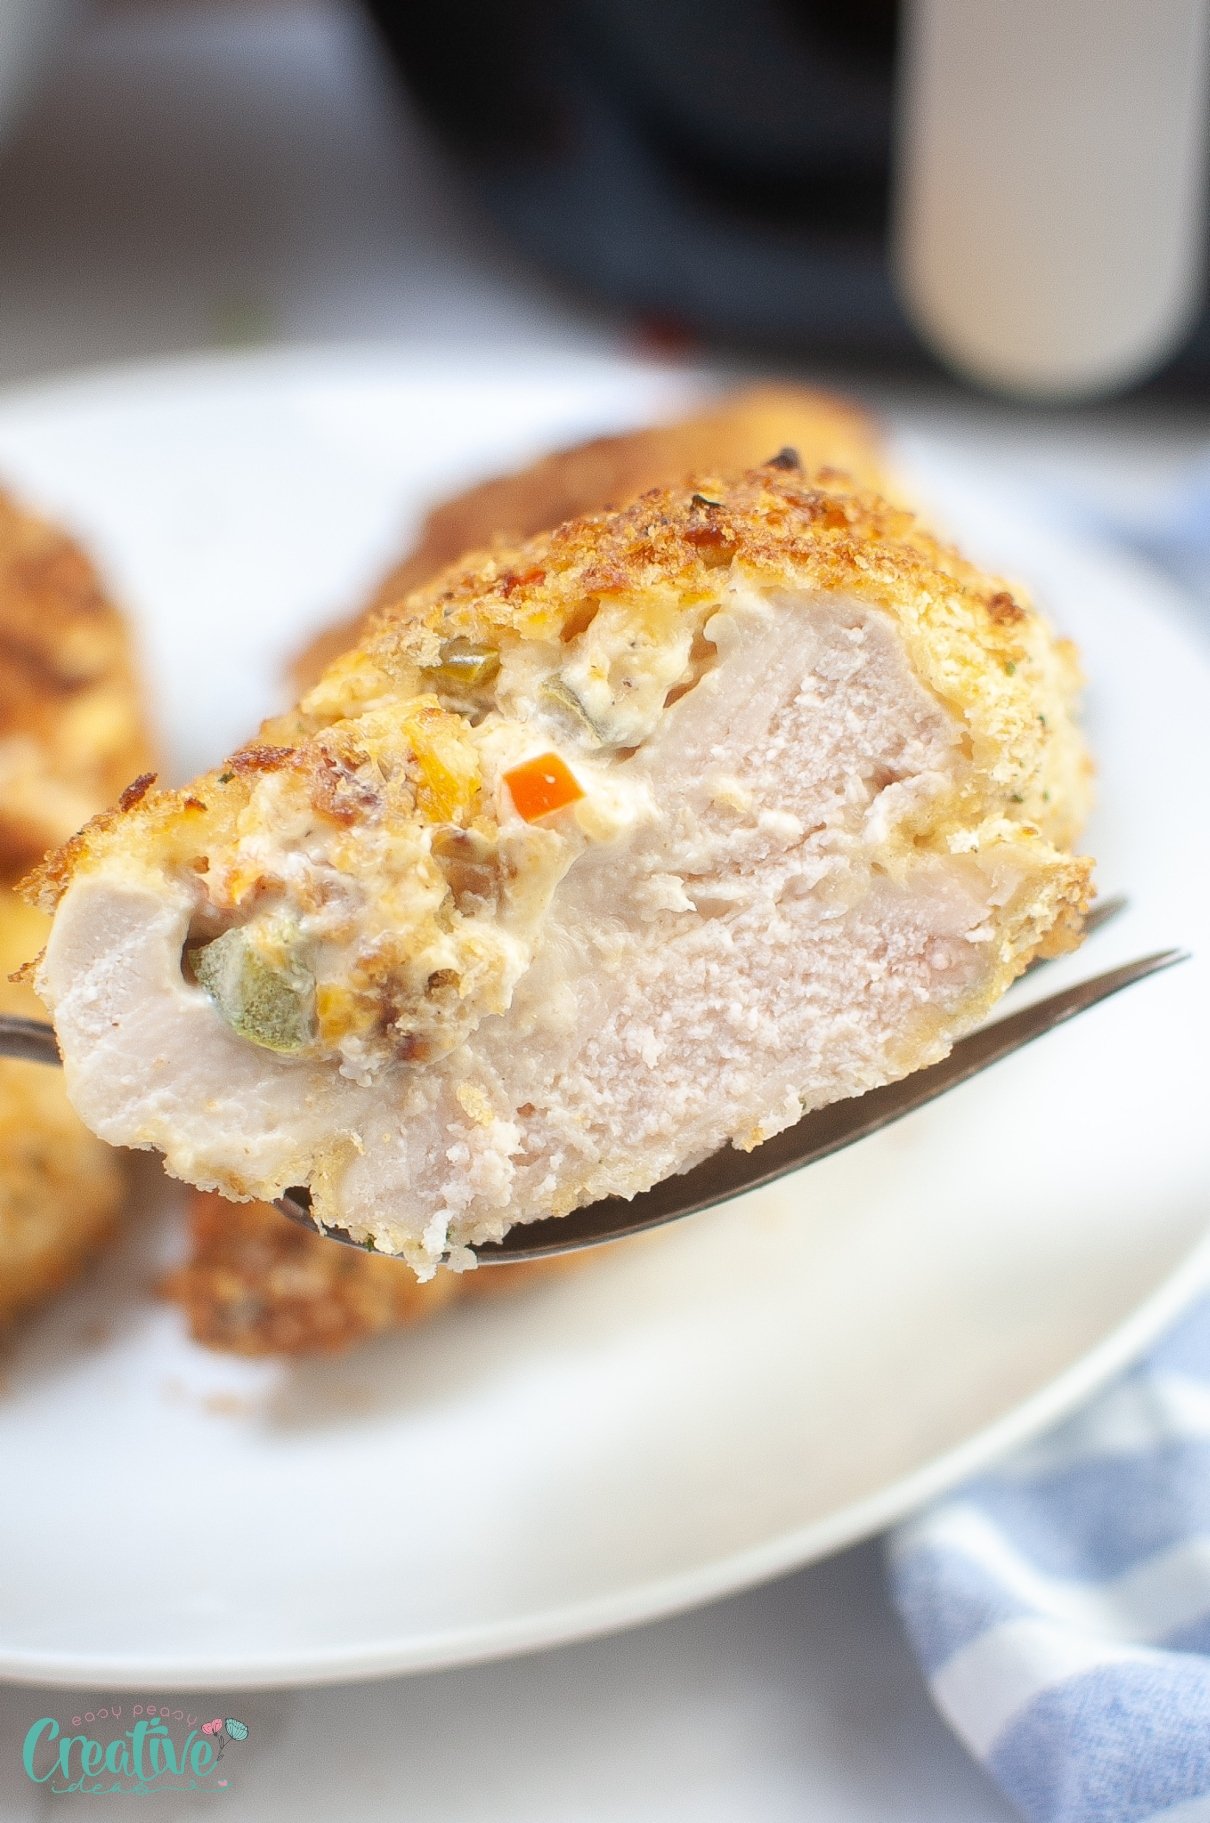 Mouthwatering air fried stuffed chicken breast, a tasty combination of tender chicken and flavorful filling.